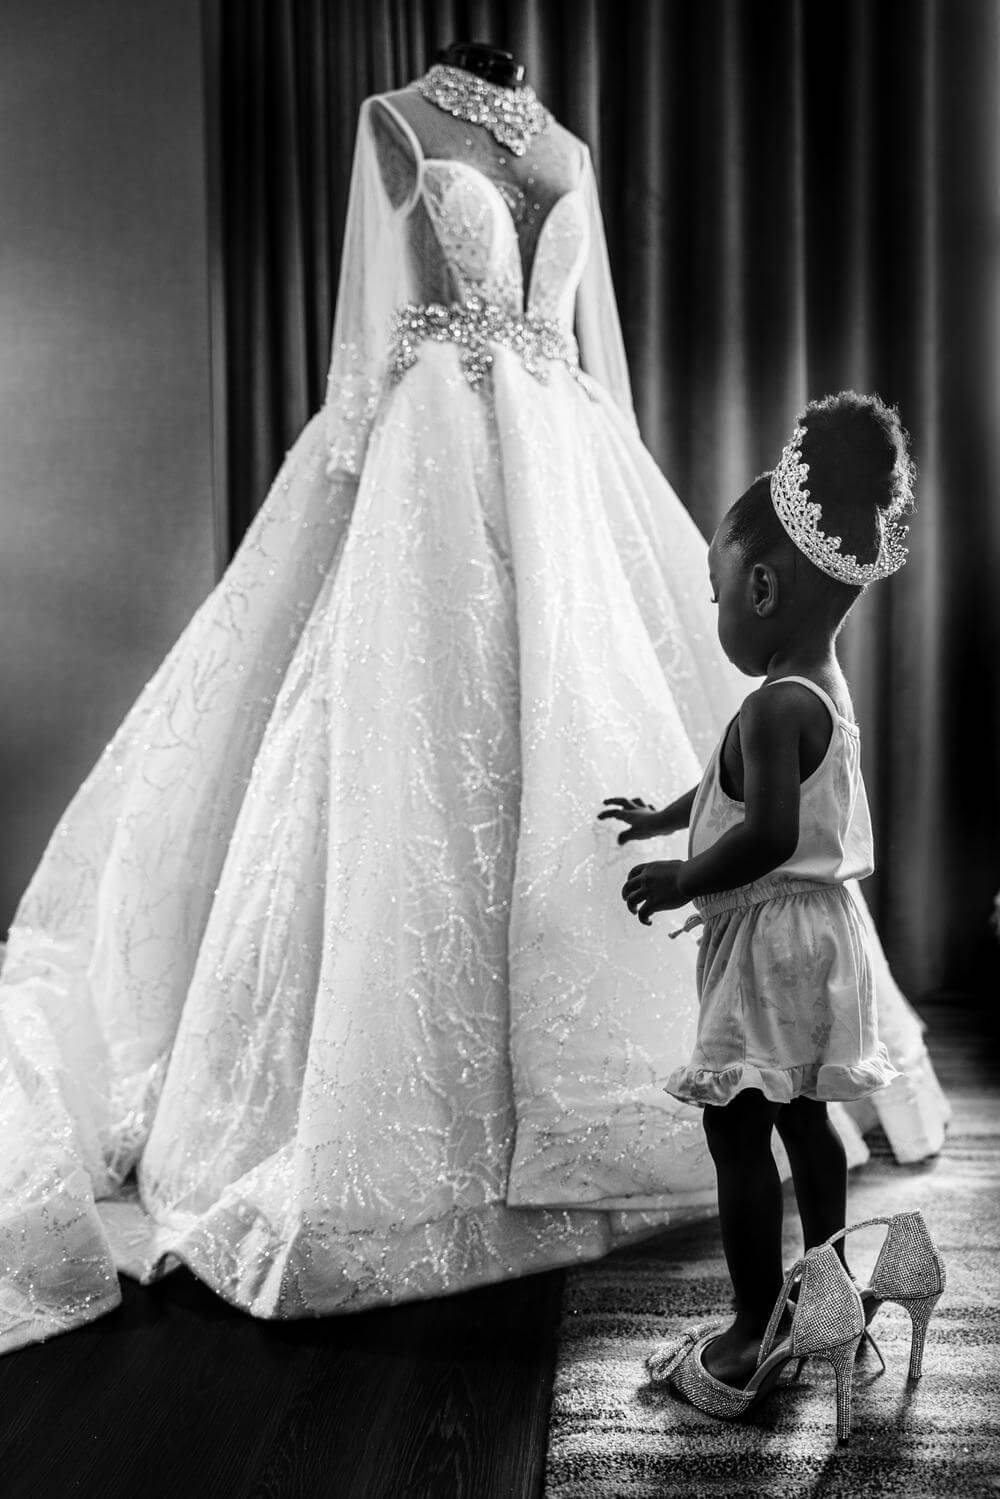 A-flower-girl-standing-in-the-brides-high-heels-admiring-her-wedding-dress.-Black-and-white-image-with-beautiful-lighting.-.jpeg